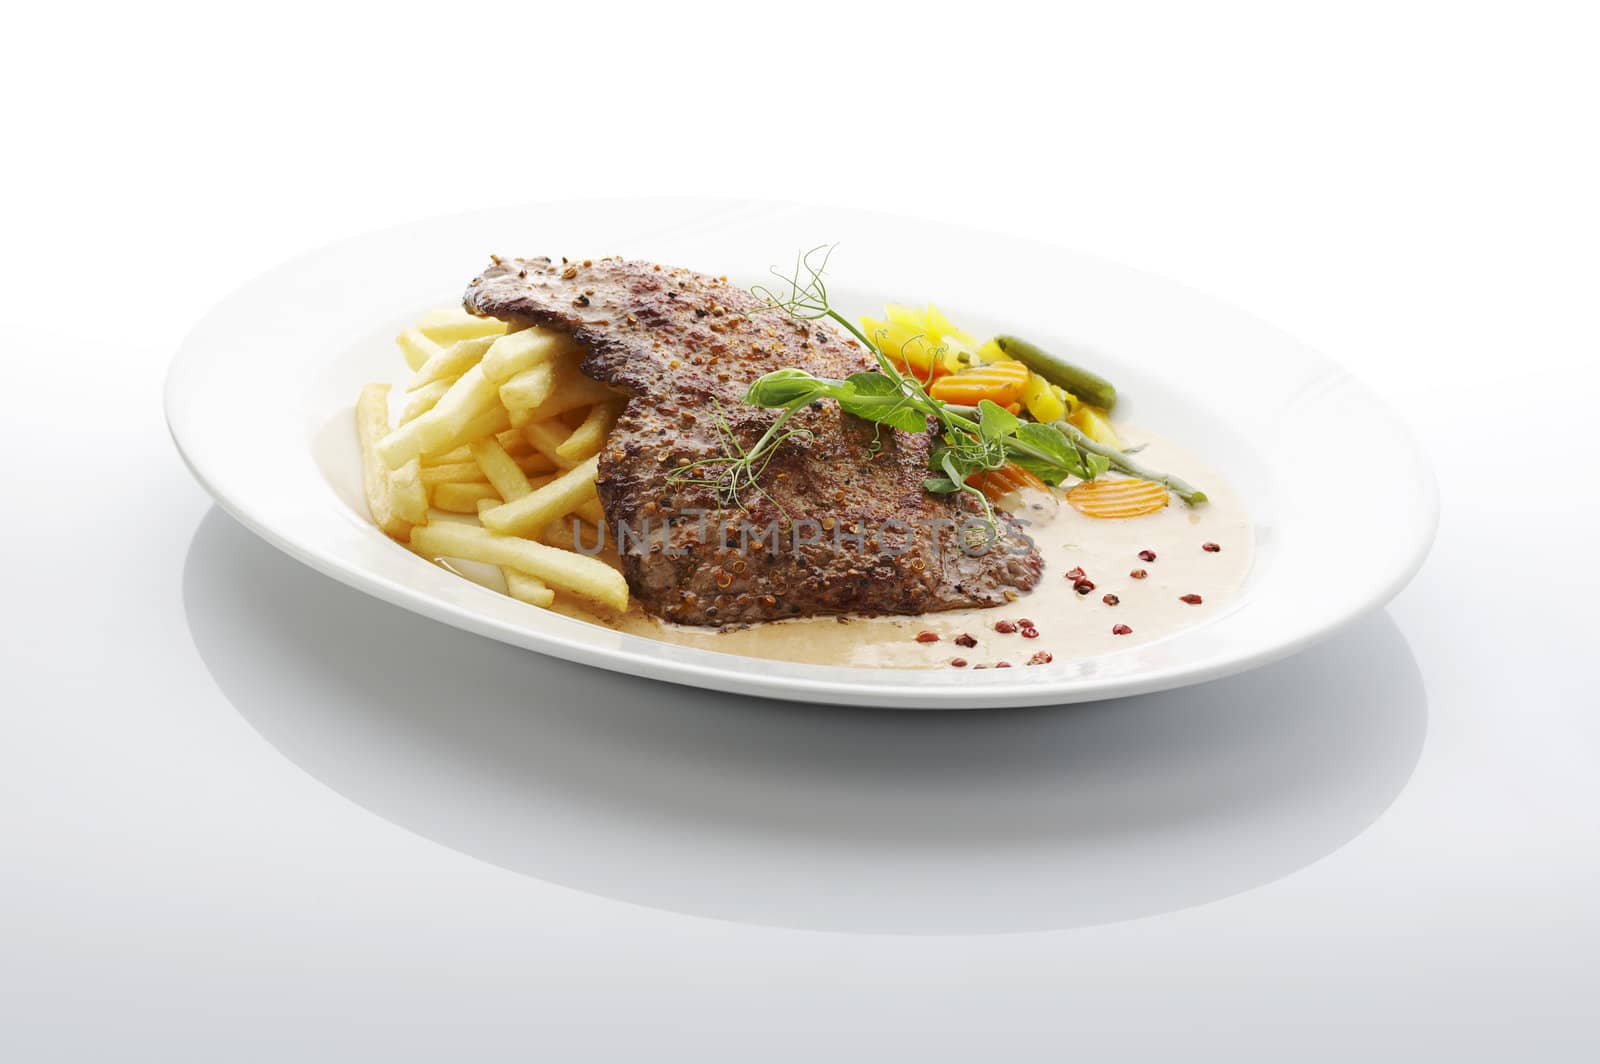 Steak and fries on the plate over white background